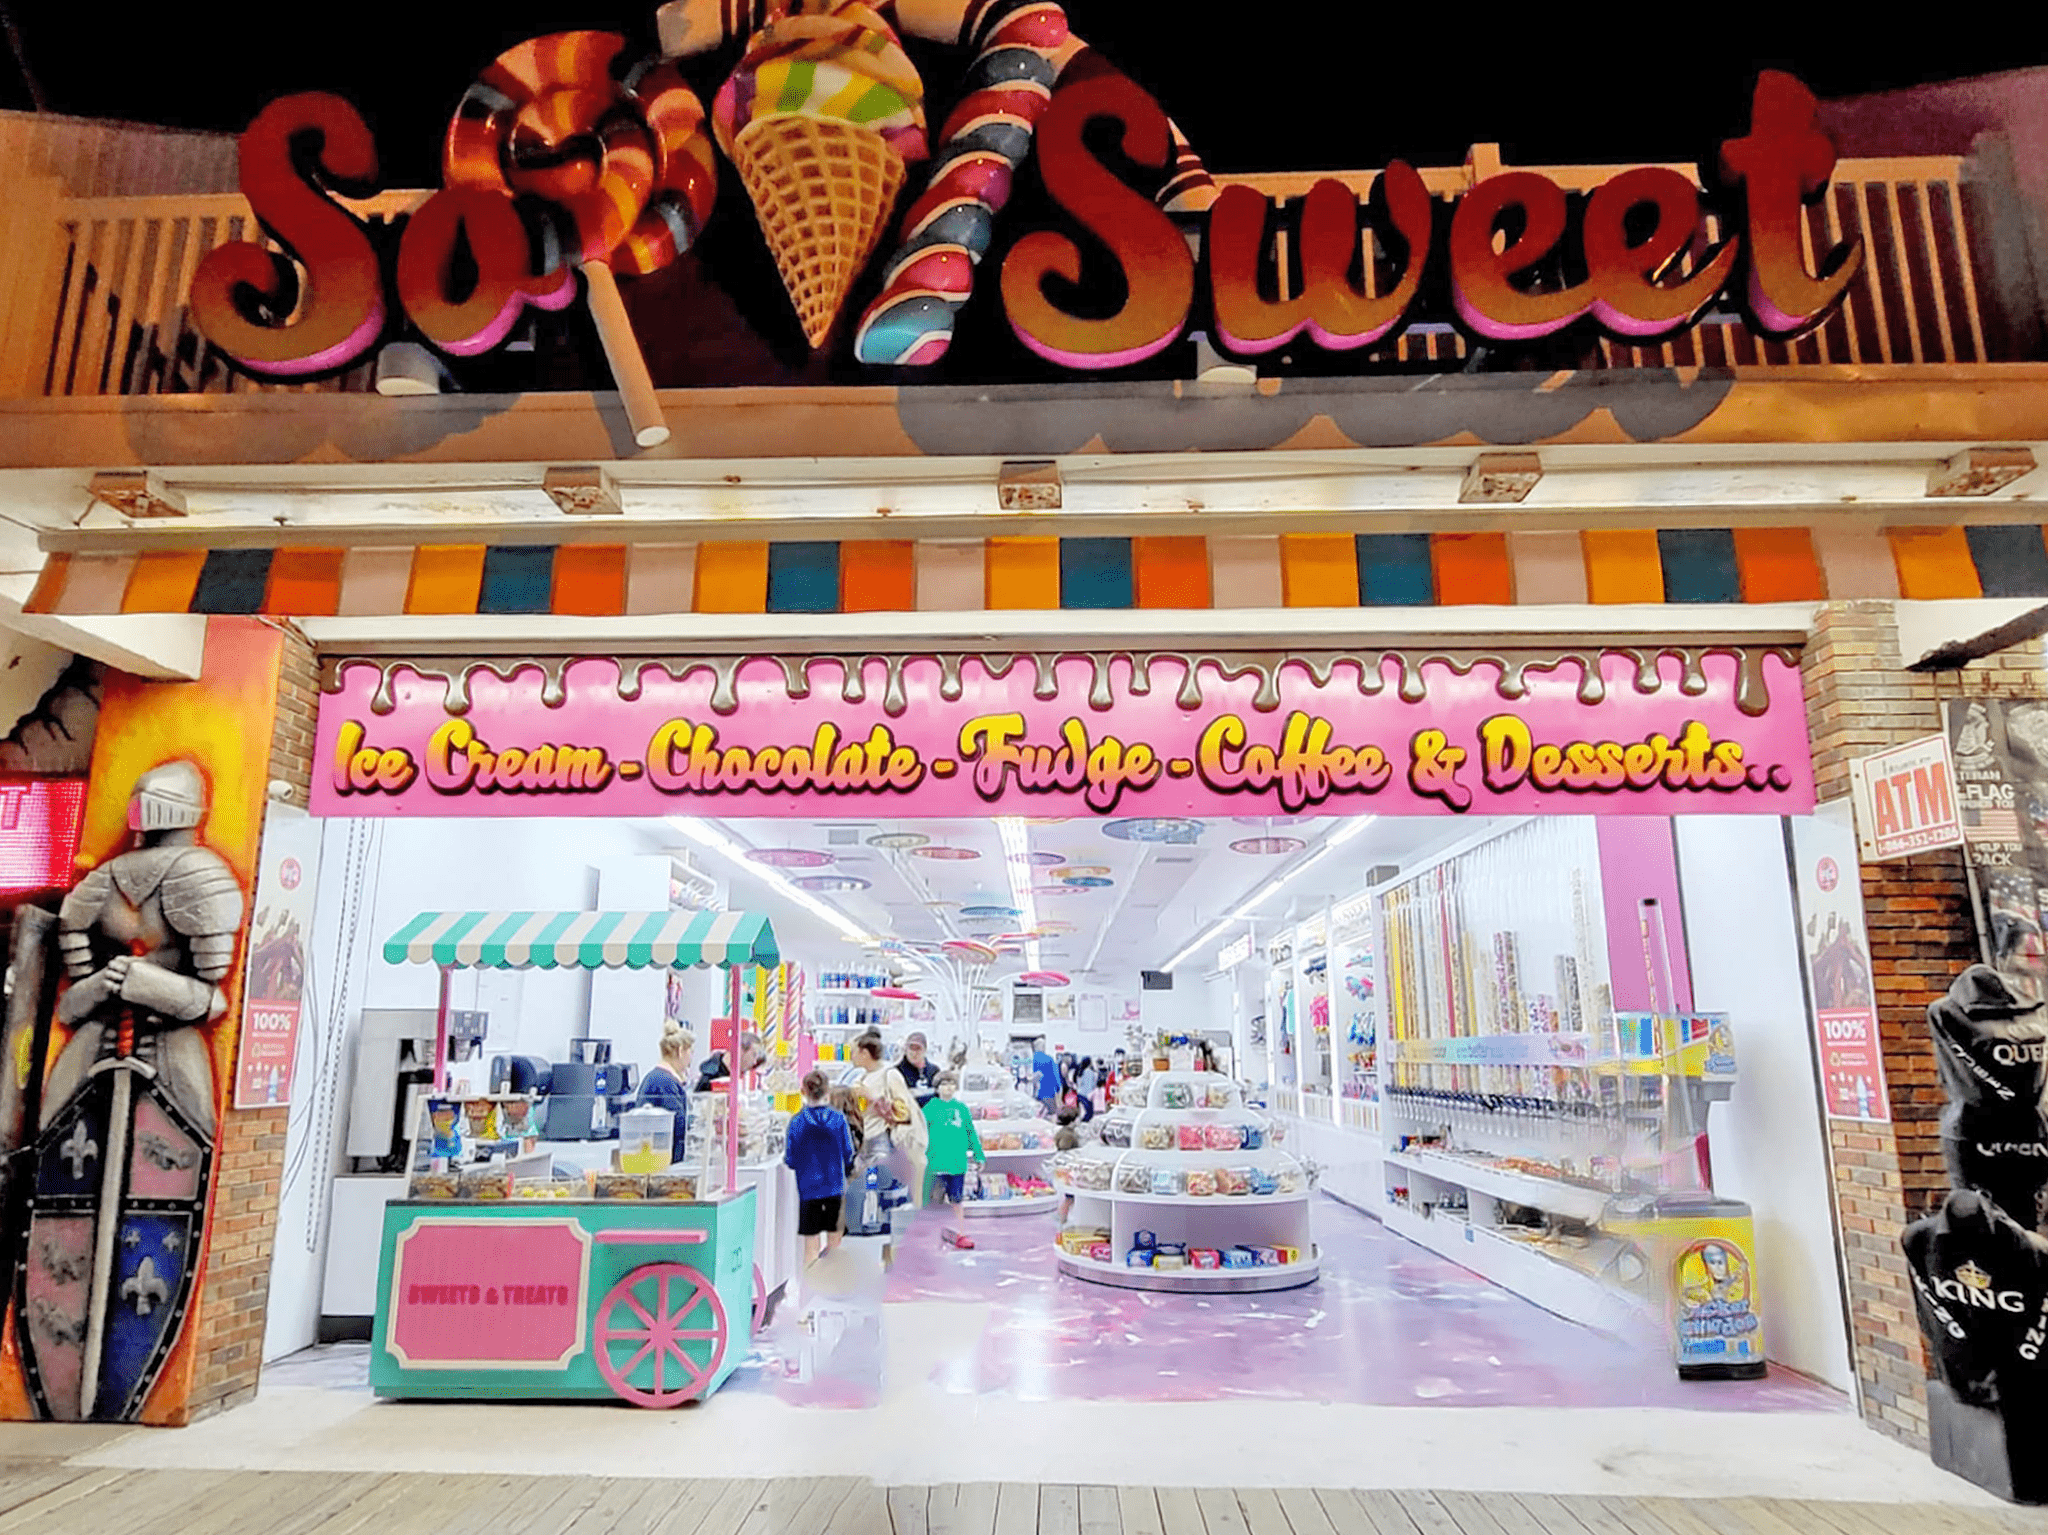 NEW - So Sweet Candy Shop!